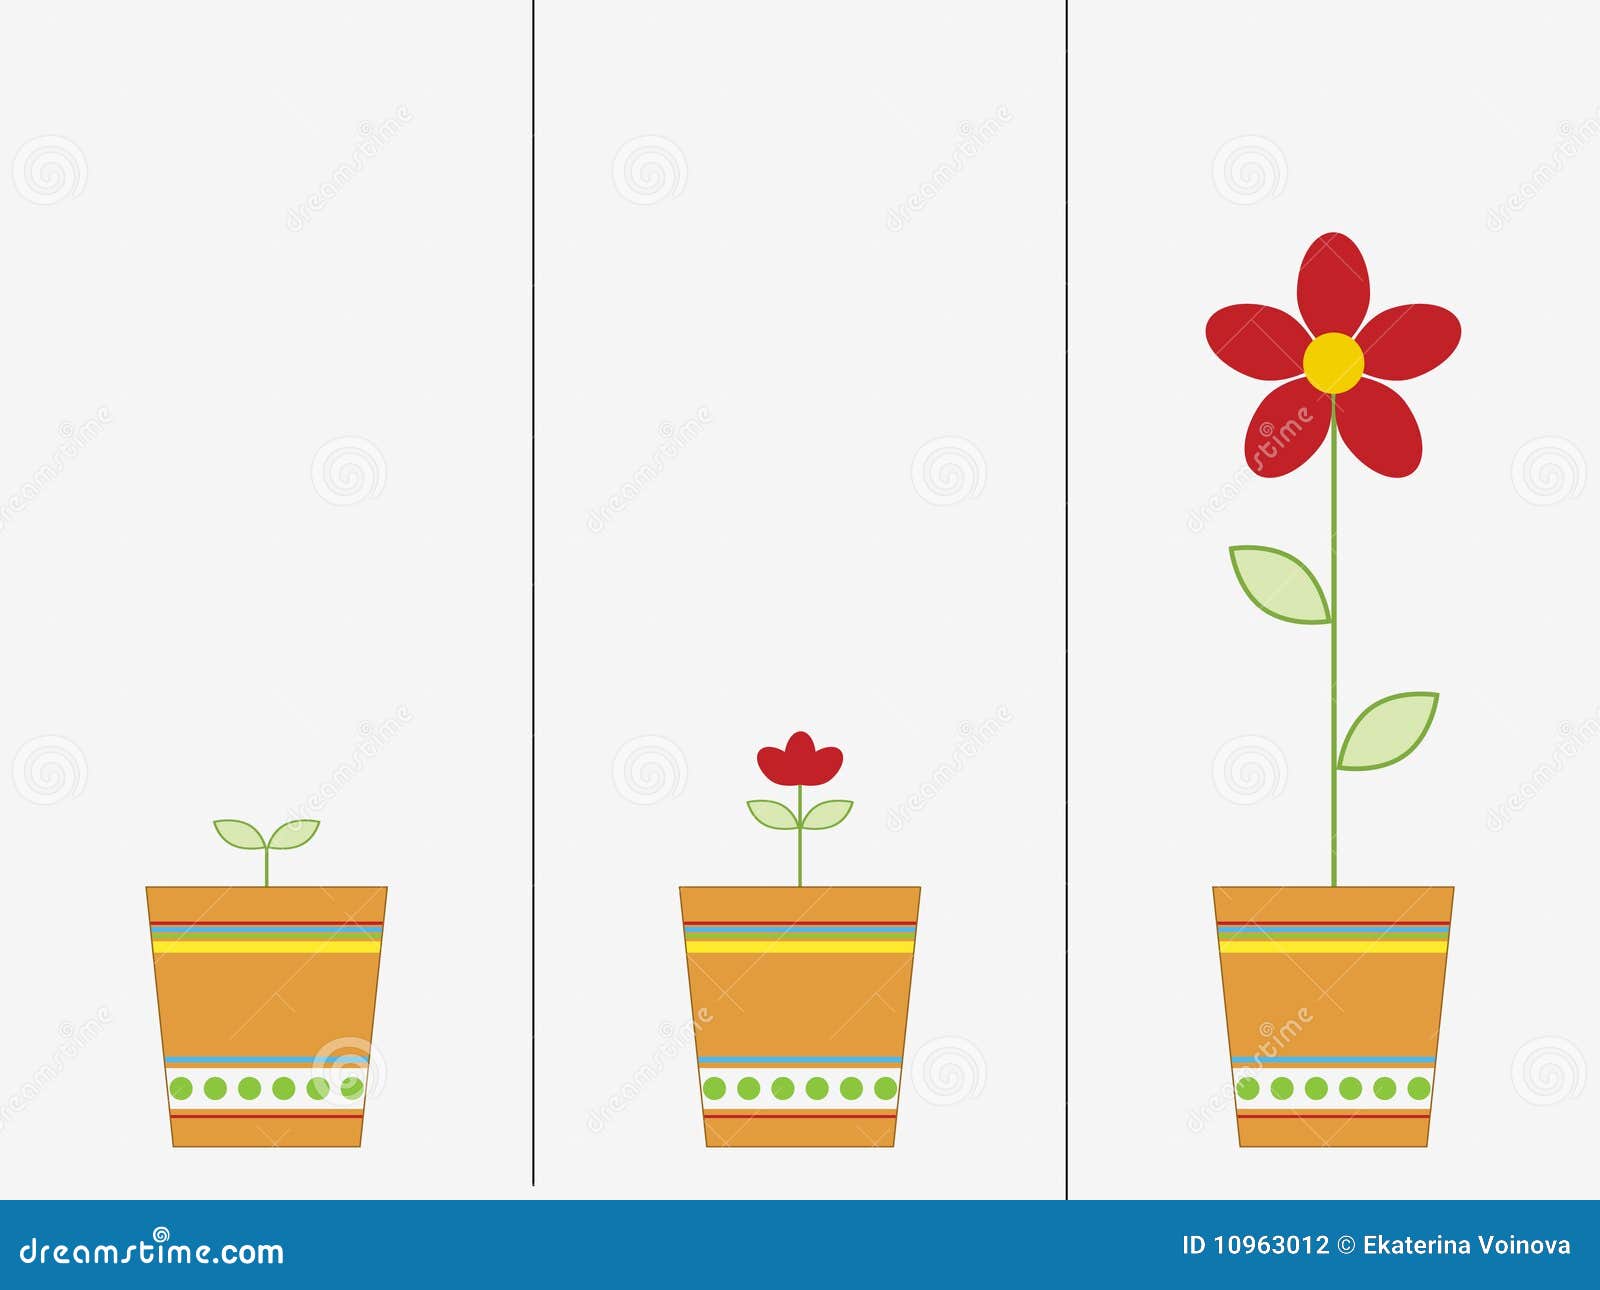 flower growing clipart - photo #26